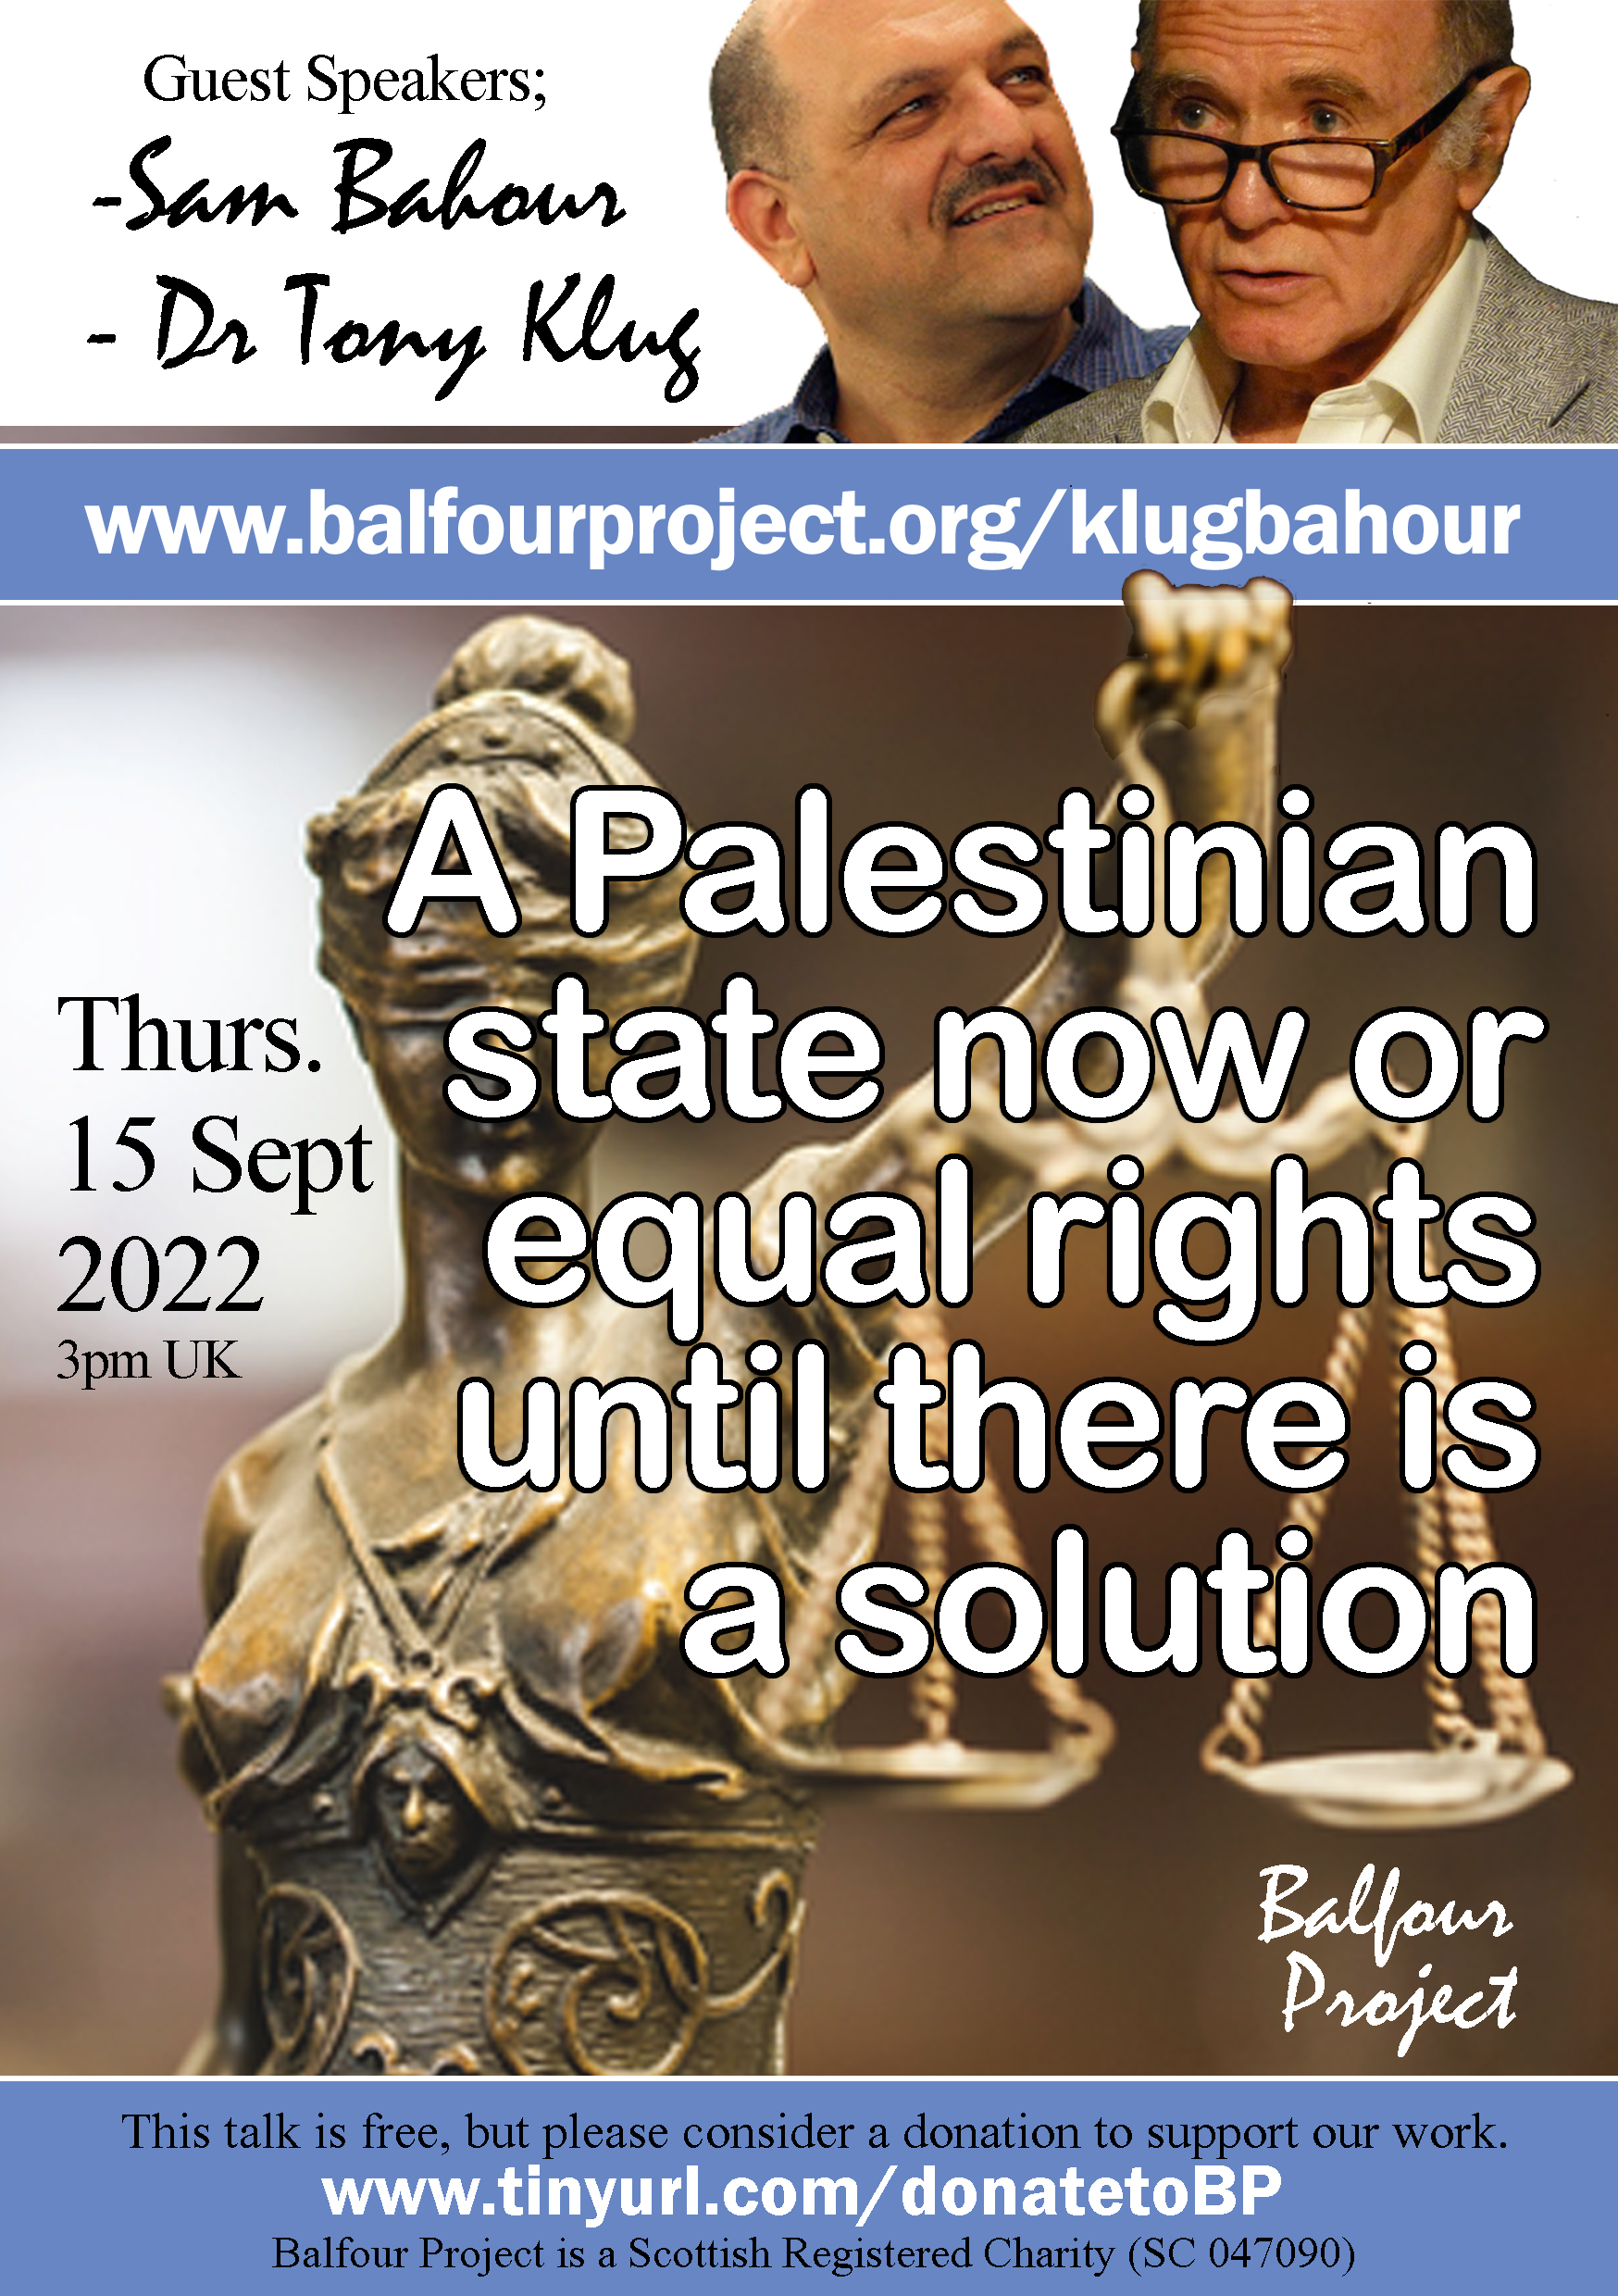 Only one way out: a unitary state with equal rights in Palestine-Israel